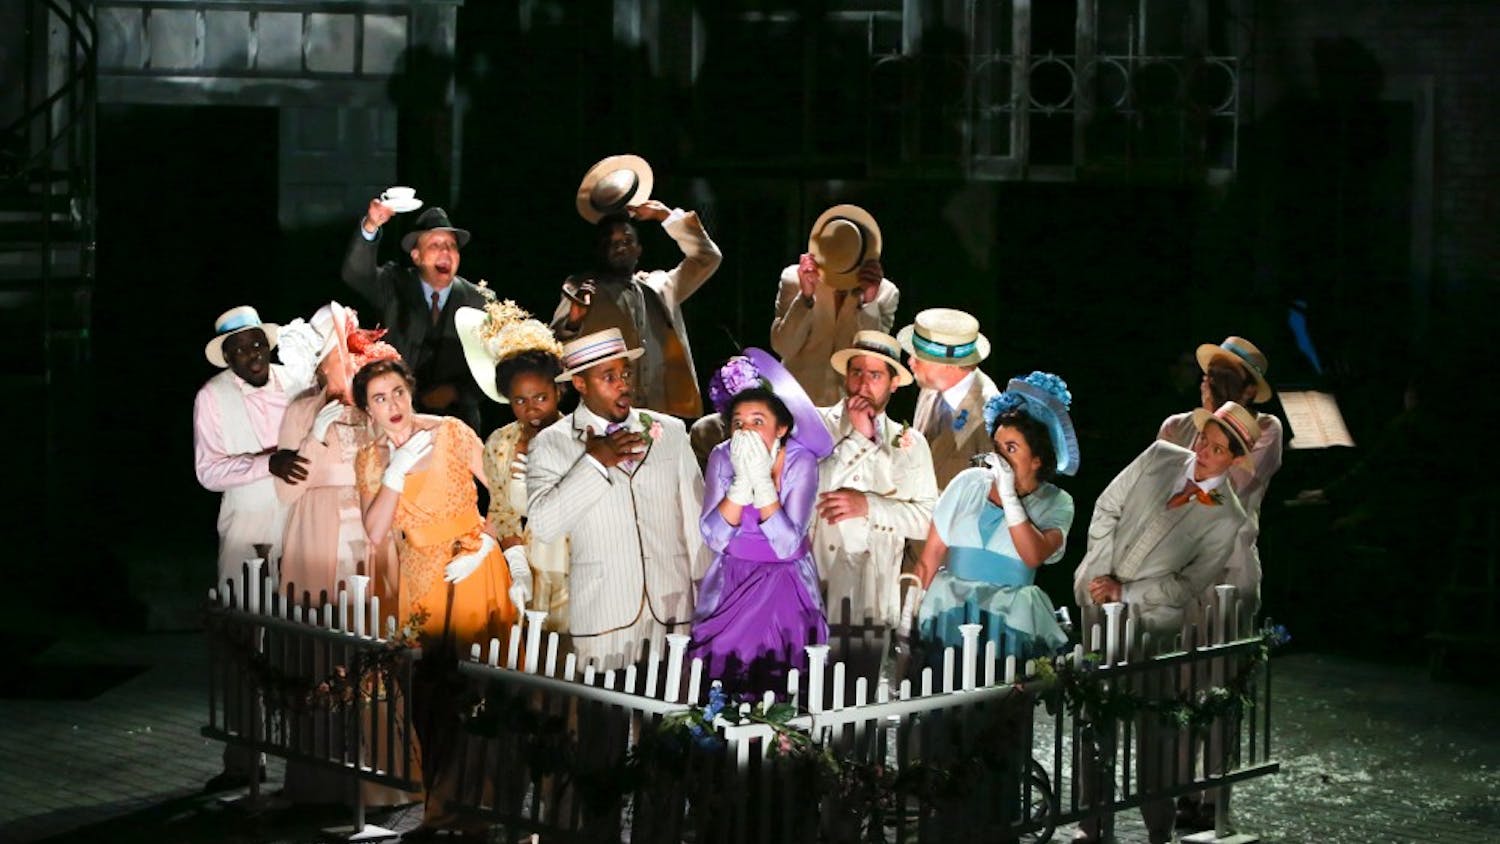 PlayMakers' Repertory Company in their production of "My Fair Lady."&nbsp;Photo taken by&nbsp;Ken Huth, courtesy of Rosalie Preston